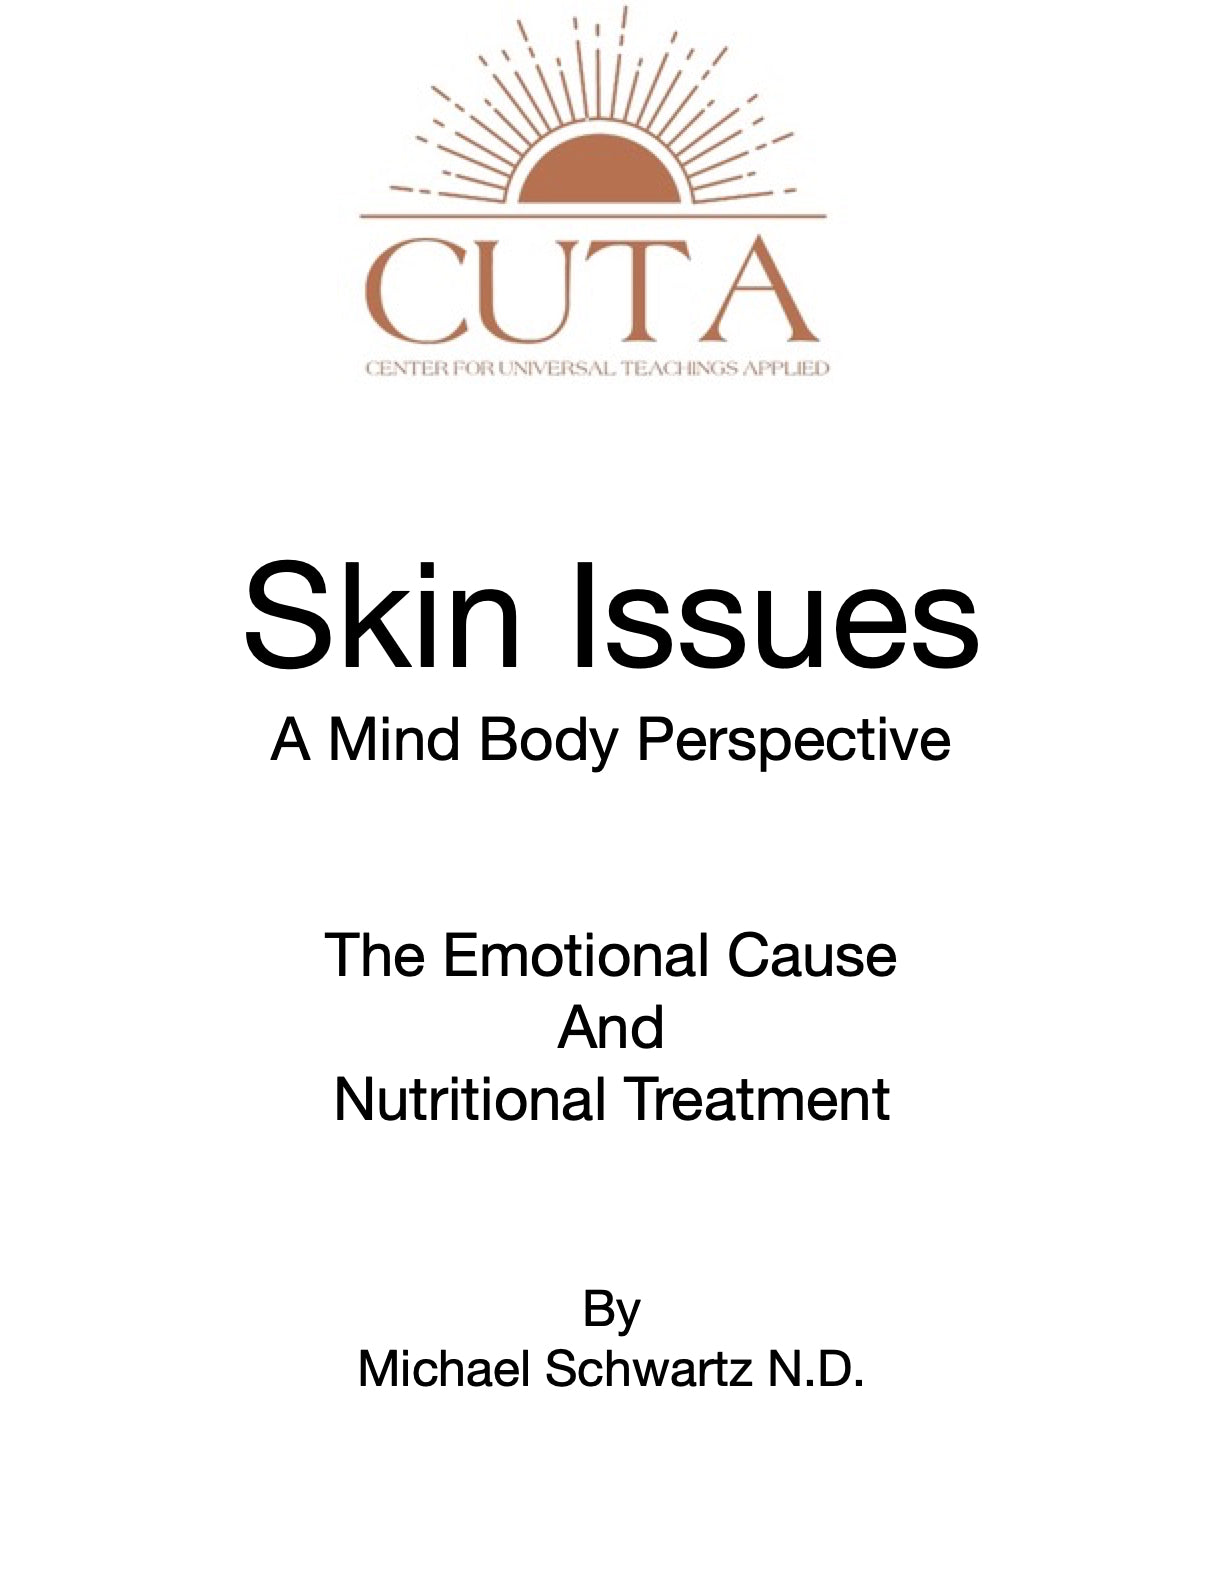 Skin Issues Booklet